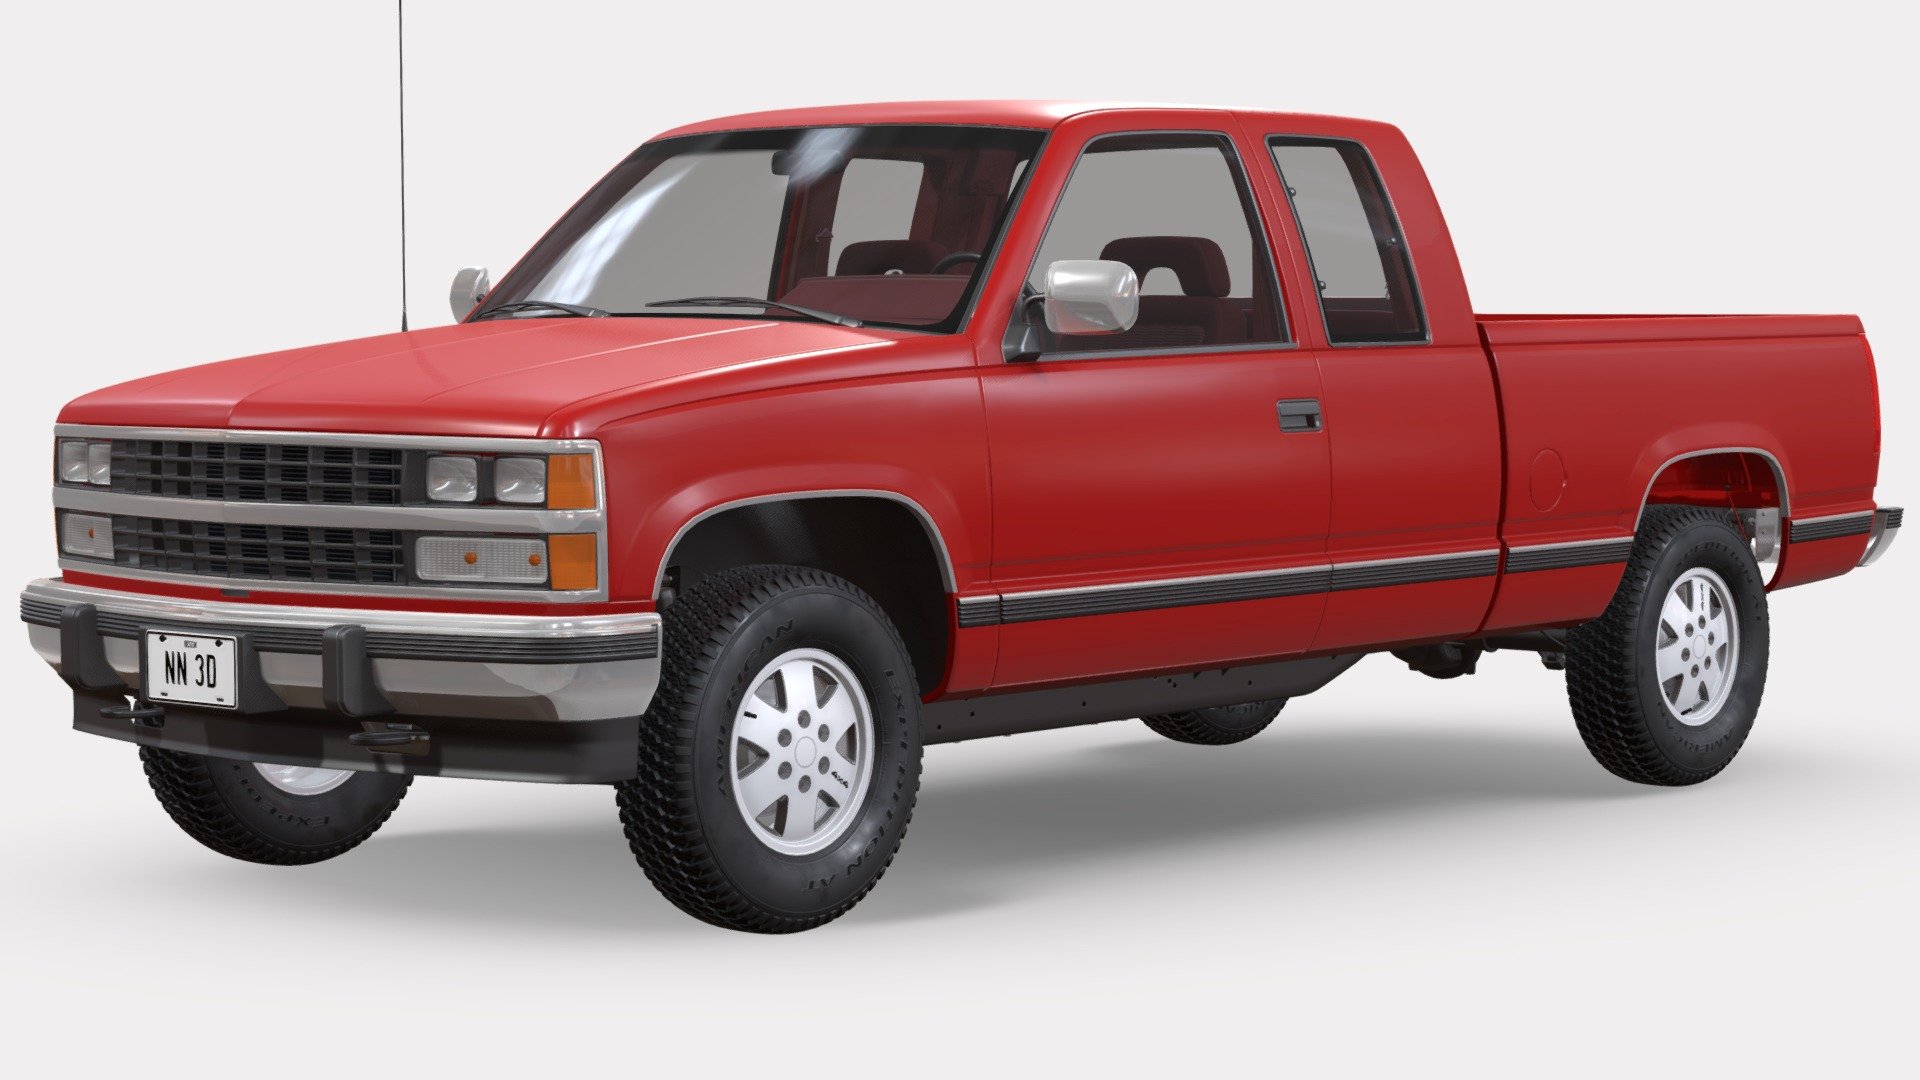 NN 3D store.

3D model of a modern extended cab pickup truck.

The truck's high detail exterior and interior are great for close up renders and the undercarriage has enough visible parts for close range shots.

The model was created with 3DS Max 2016 using the open subdivision modifier which has been left in the stack to adjust the level of detail.

There are also included HI and LO poly versions in Blender format with textures.

Exchange files included: FBX and OBJ with HI and LO poly versions, 3DS only with LO poly version.

SPECIFICATIONS:

The model has 317.000 polygons with subdivision level at 0 and 1.268.000 at level 1.

All textures are included and mapped in all files but they will render like the preview images only in 3DSMax and Blender versions with V-Ray and Cycles respectively, the rest of the files might have to be adjusted depending on the software you are using.

Textures are in PNG and JPG format with 4096x4096, 2048x2048 and 1024x1024 resolution 3d model